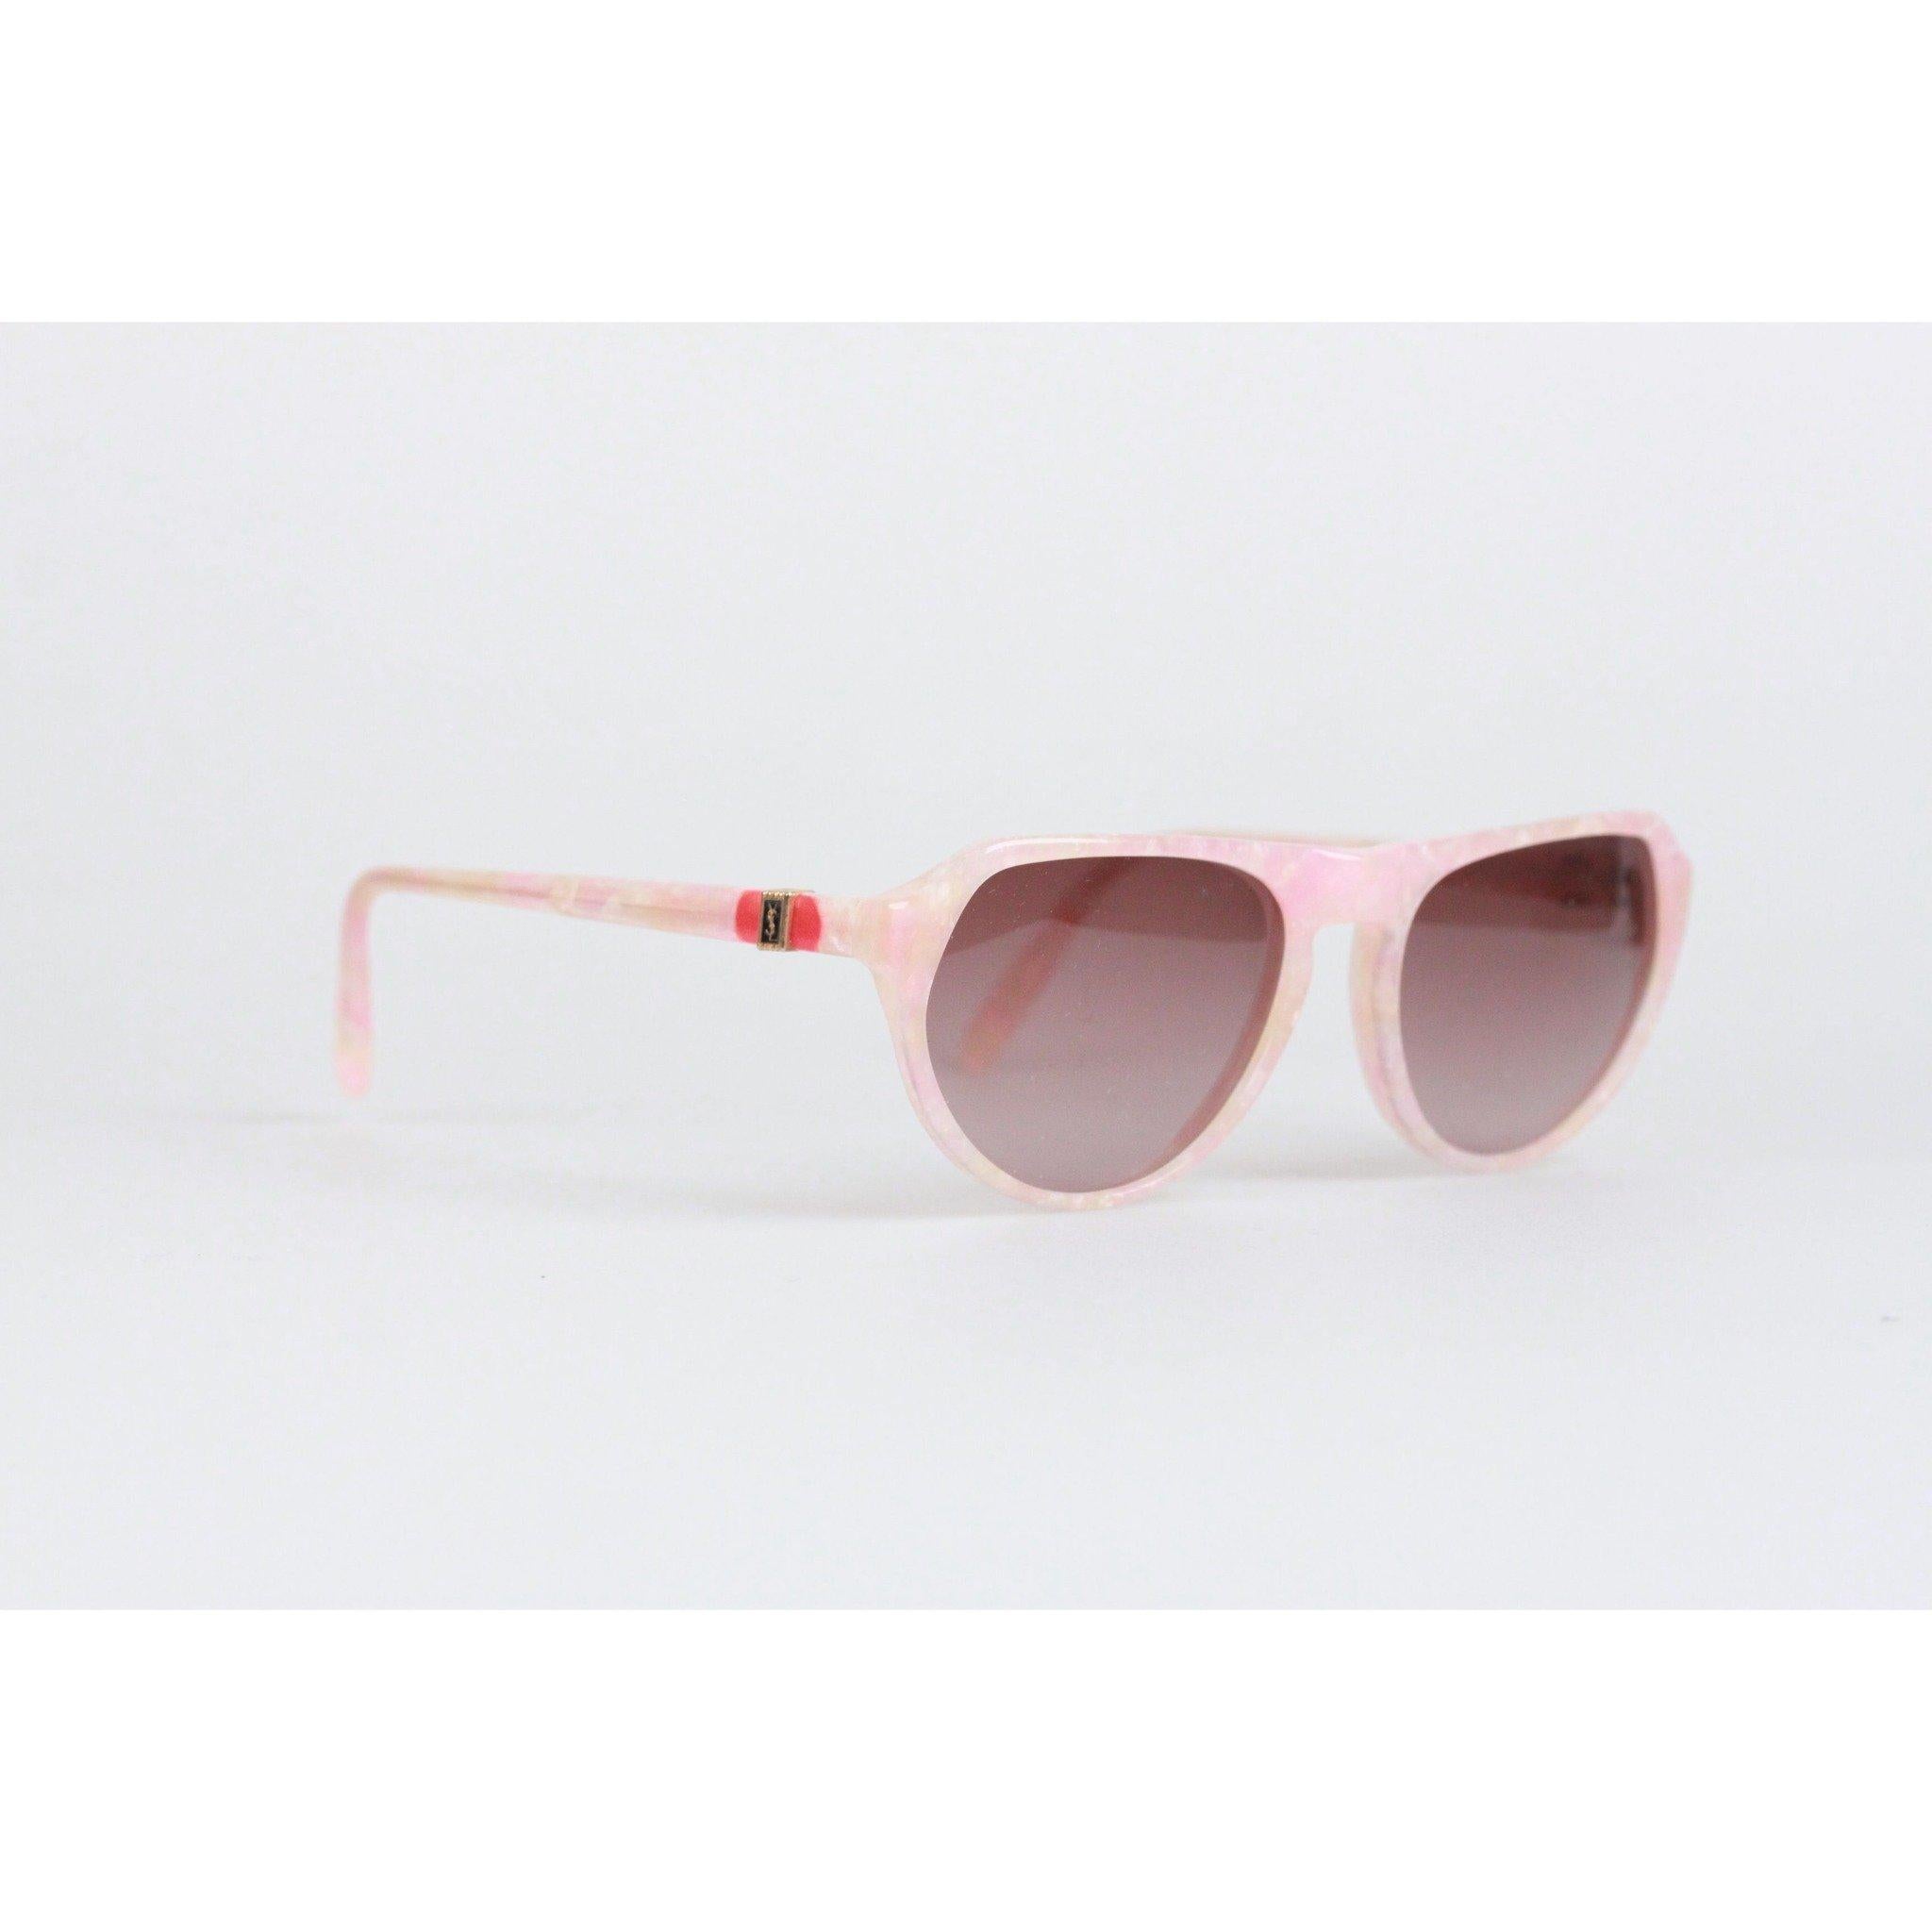 MATERIAL: Acetate COLOR: Pink MODEL: Priam GENDER: Women SIZE: Small COUNTRY OF MANUFACTURE: France Condition CONDITION DETAILS: NEW OLD STOCK -Never Worn or Used - They will come with a GENERIC case. Measurements MEASUREMENTS: TEMPLE MAX. LENGTH: